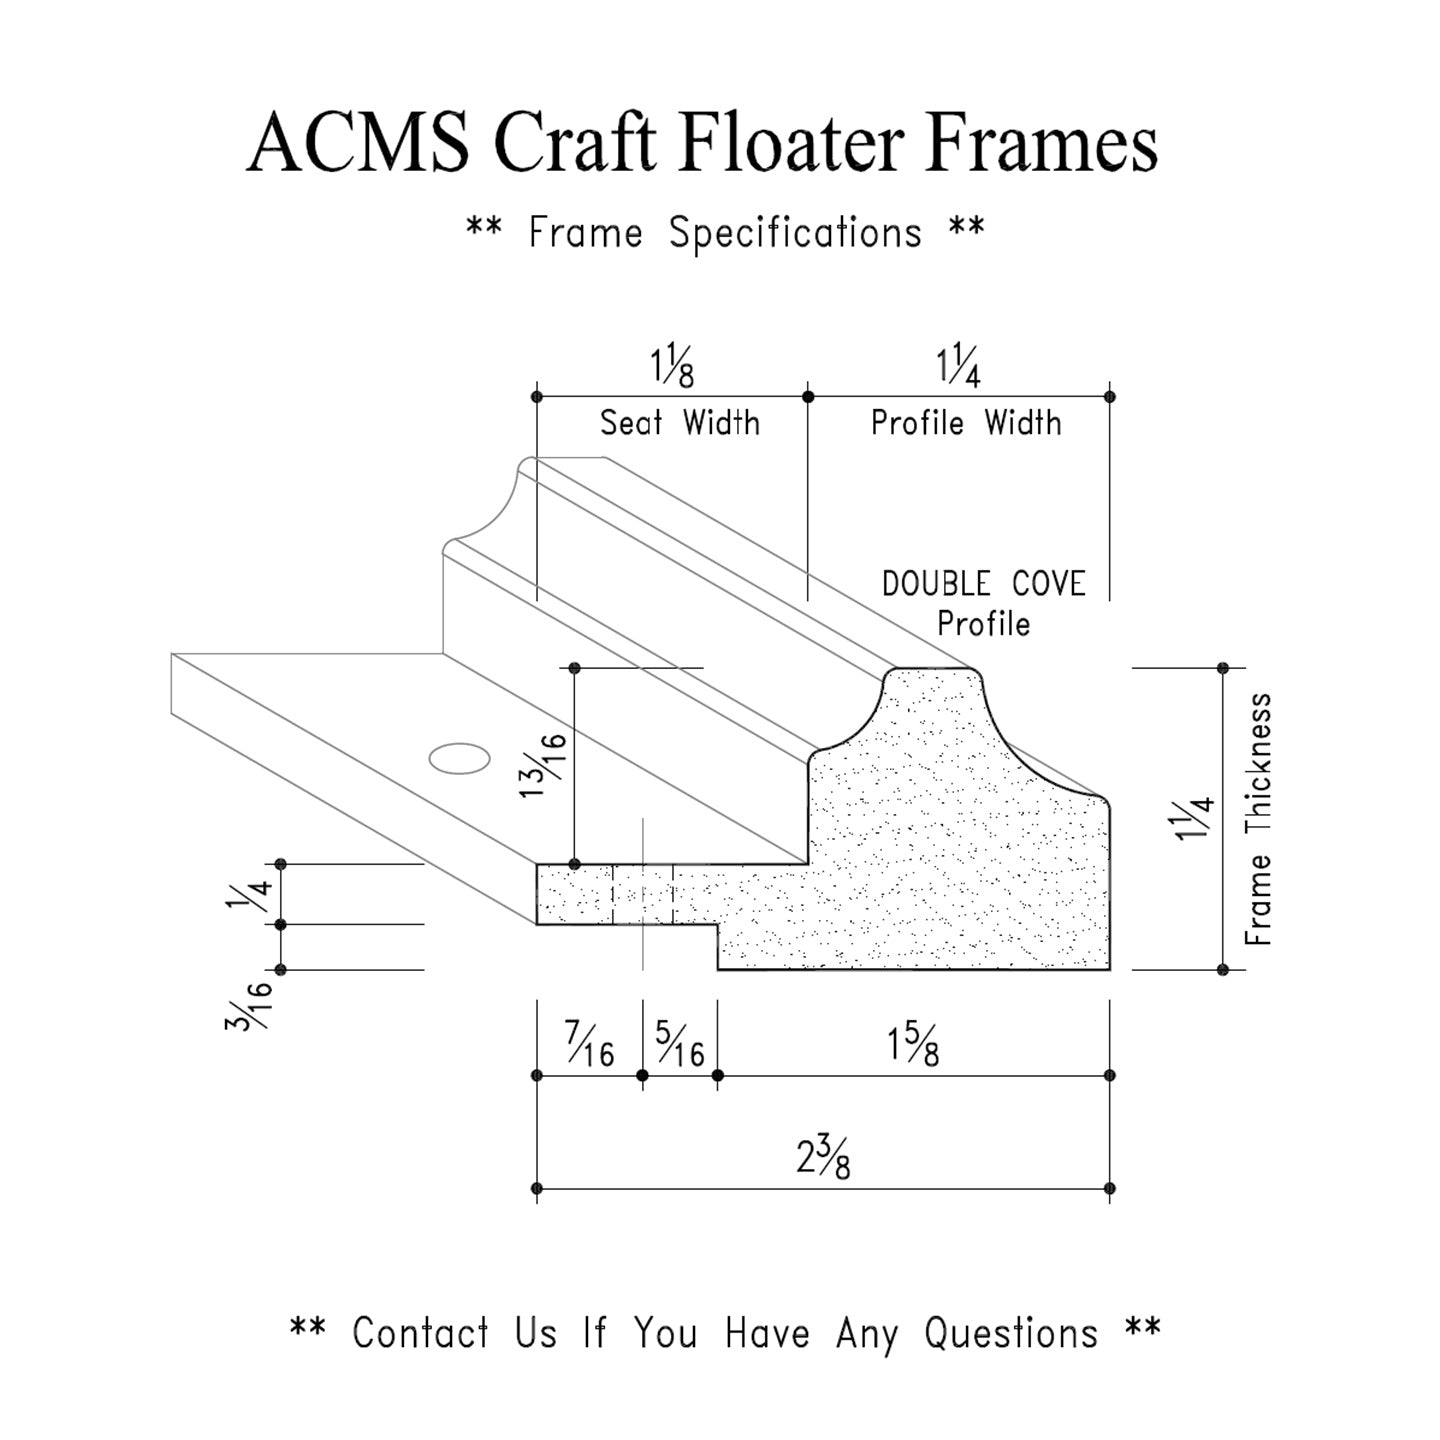 ACMS Oval Craft Floater Frame - For 3/4" Thick Artwork - Profile 1 1/4" DOUBLE COVE - 1 1/4" Thick Frame